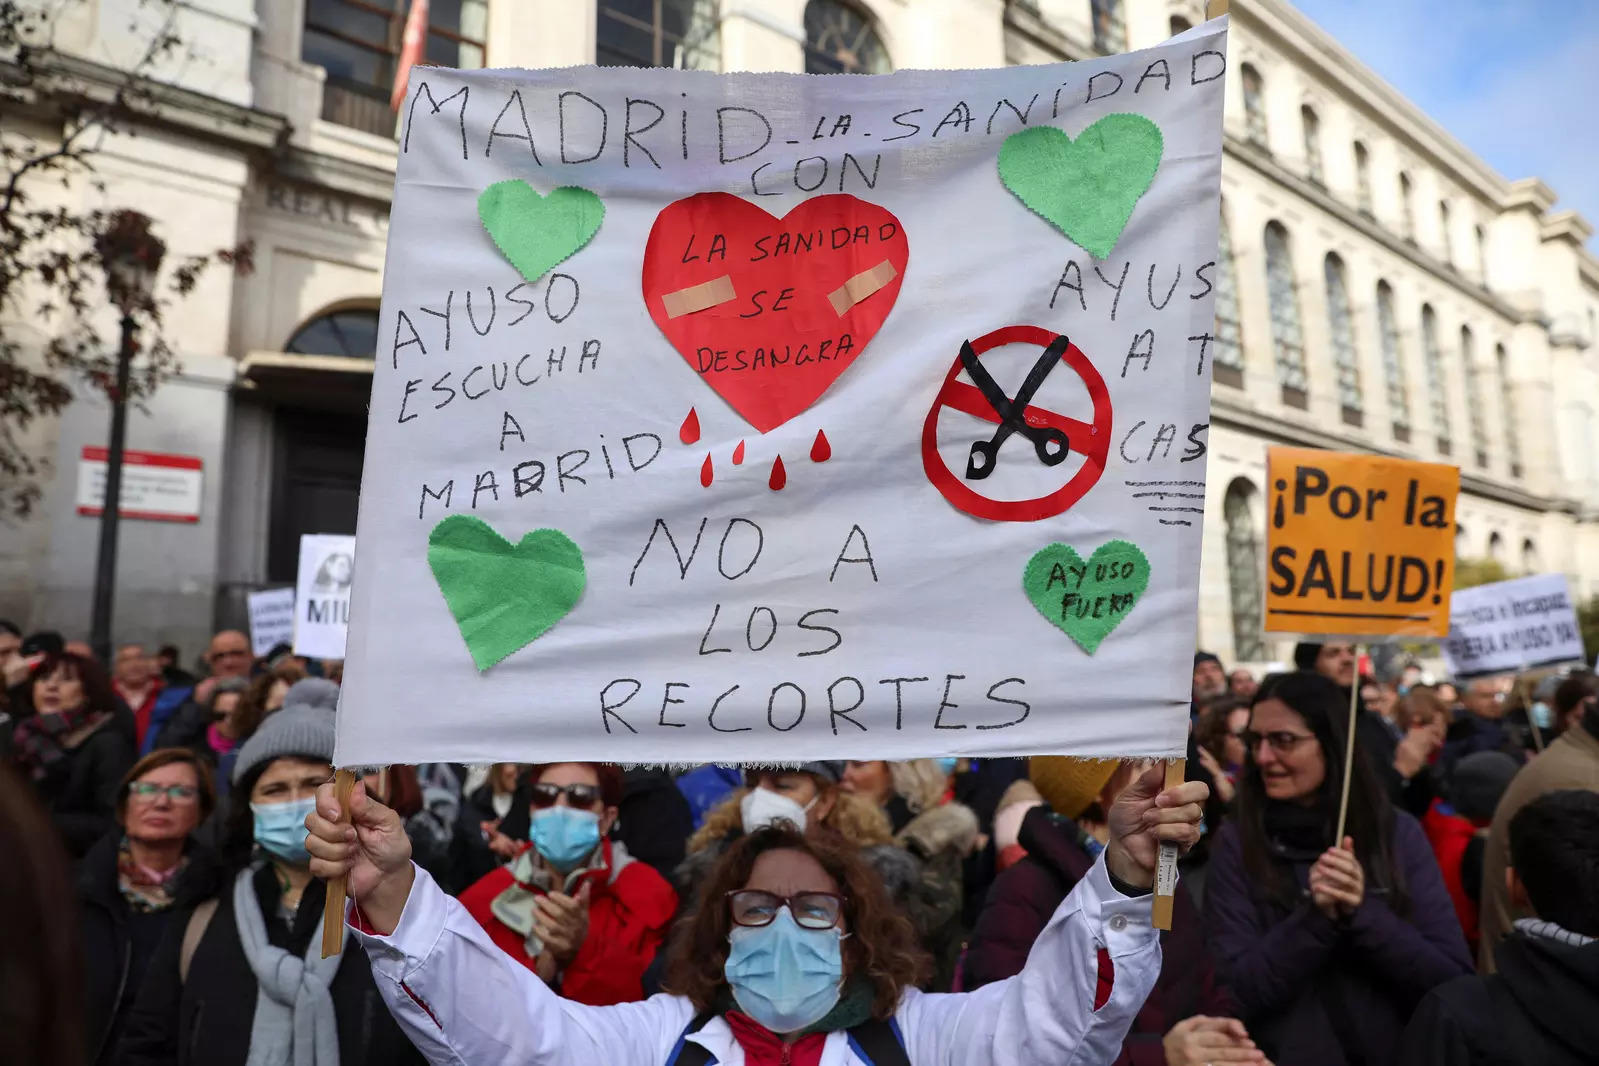 Health workers protest against the public health care policy of the Madrid regional government, which they say is destroying primary care, in Spain, January 15. (Reuters)